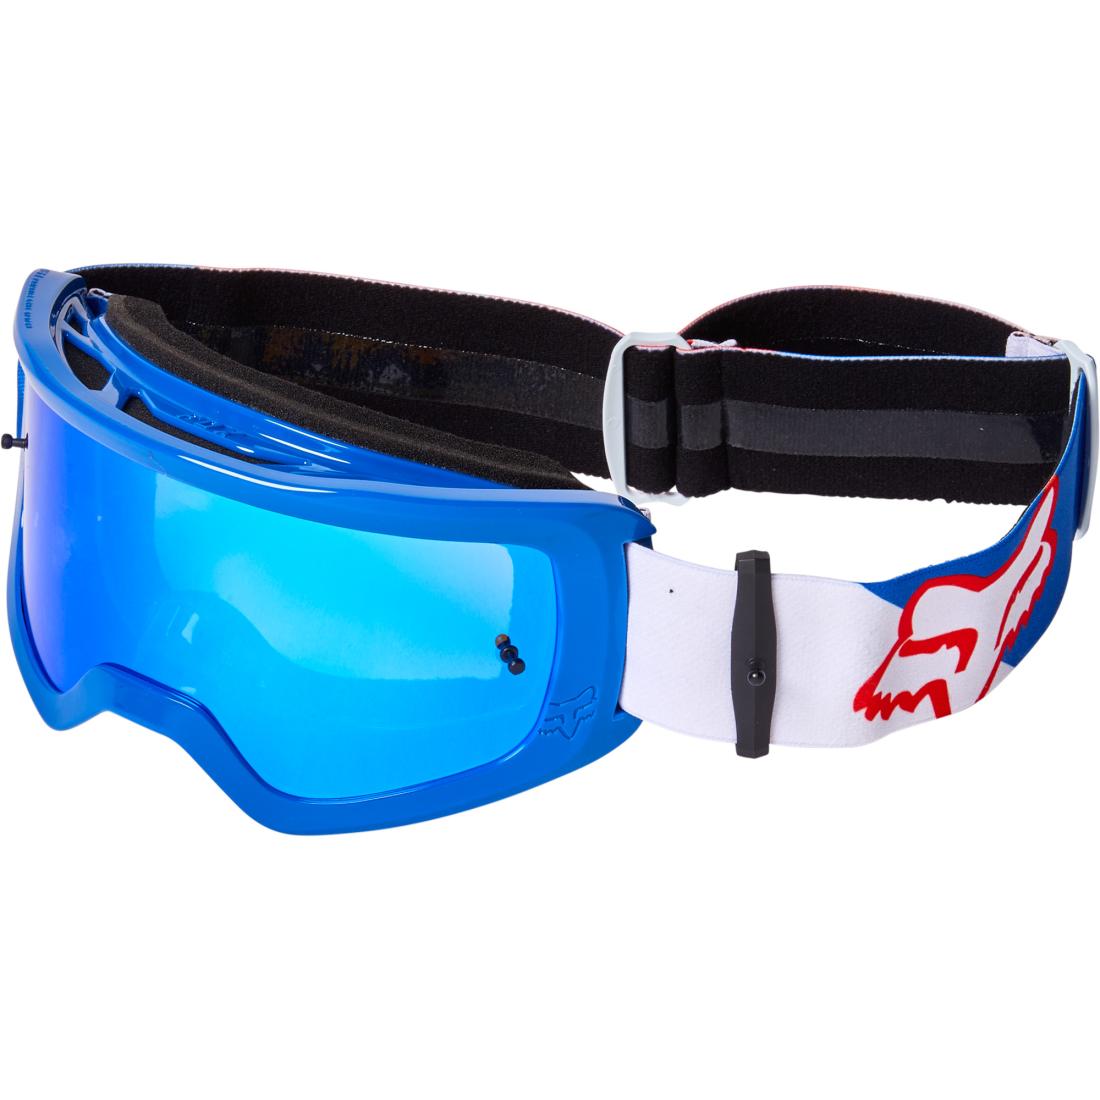 Main Skew Goggle - Spark White/Red/Blue